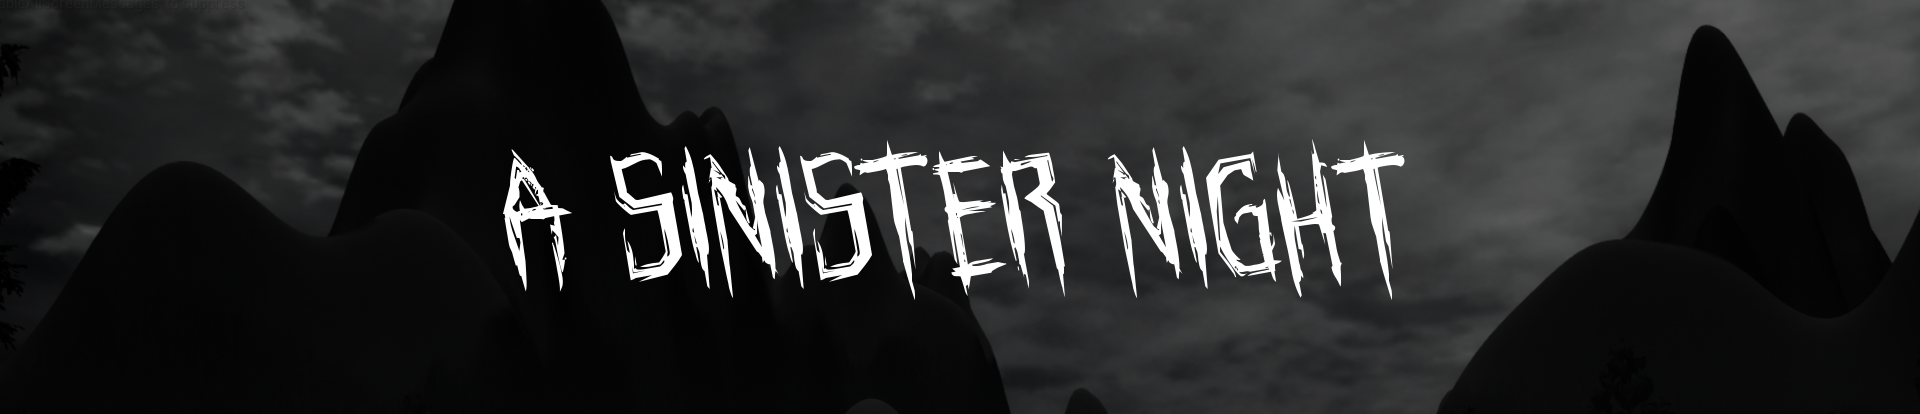 A Sinister Night - Horror